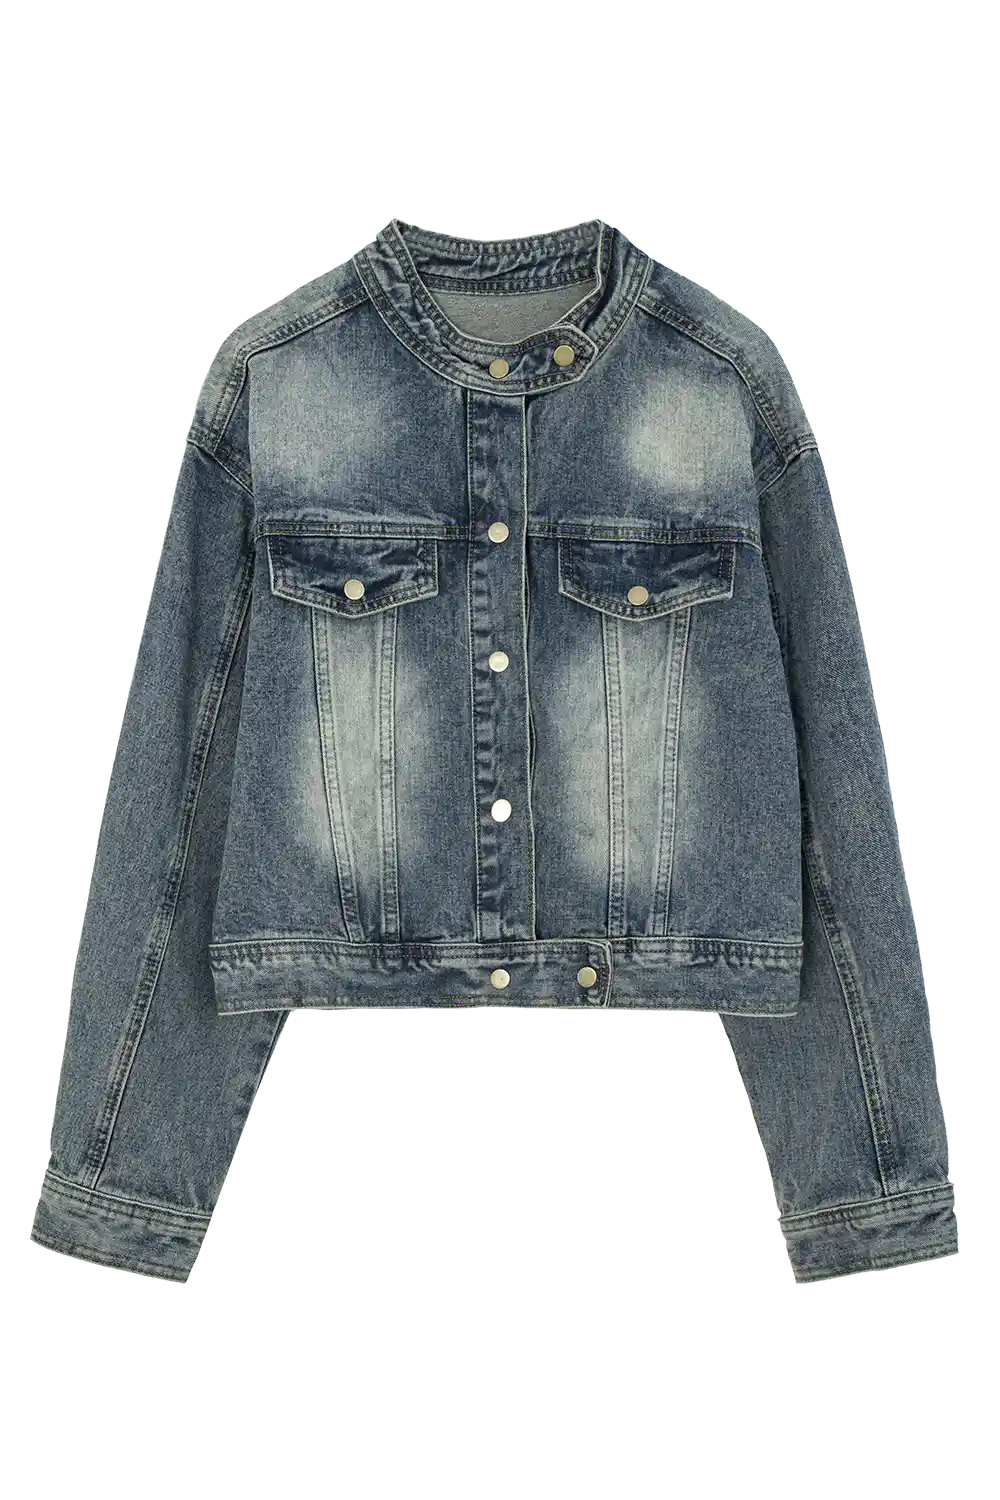 Chic Denim Jacket with Classic Pockets and Button Details